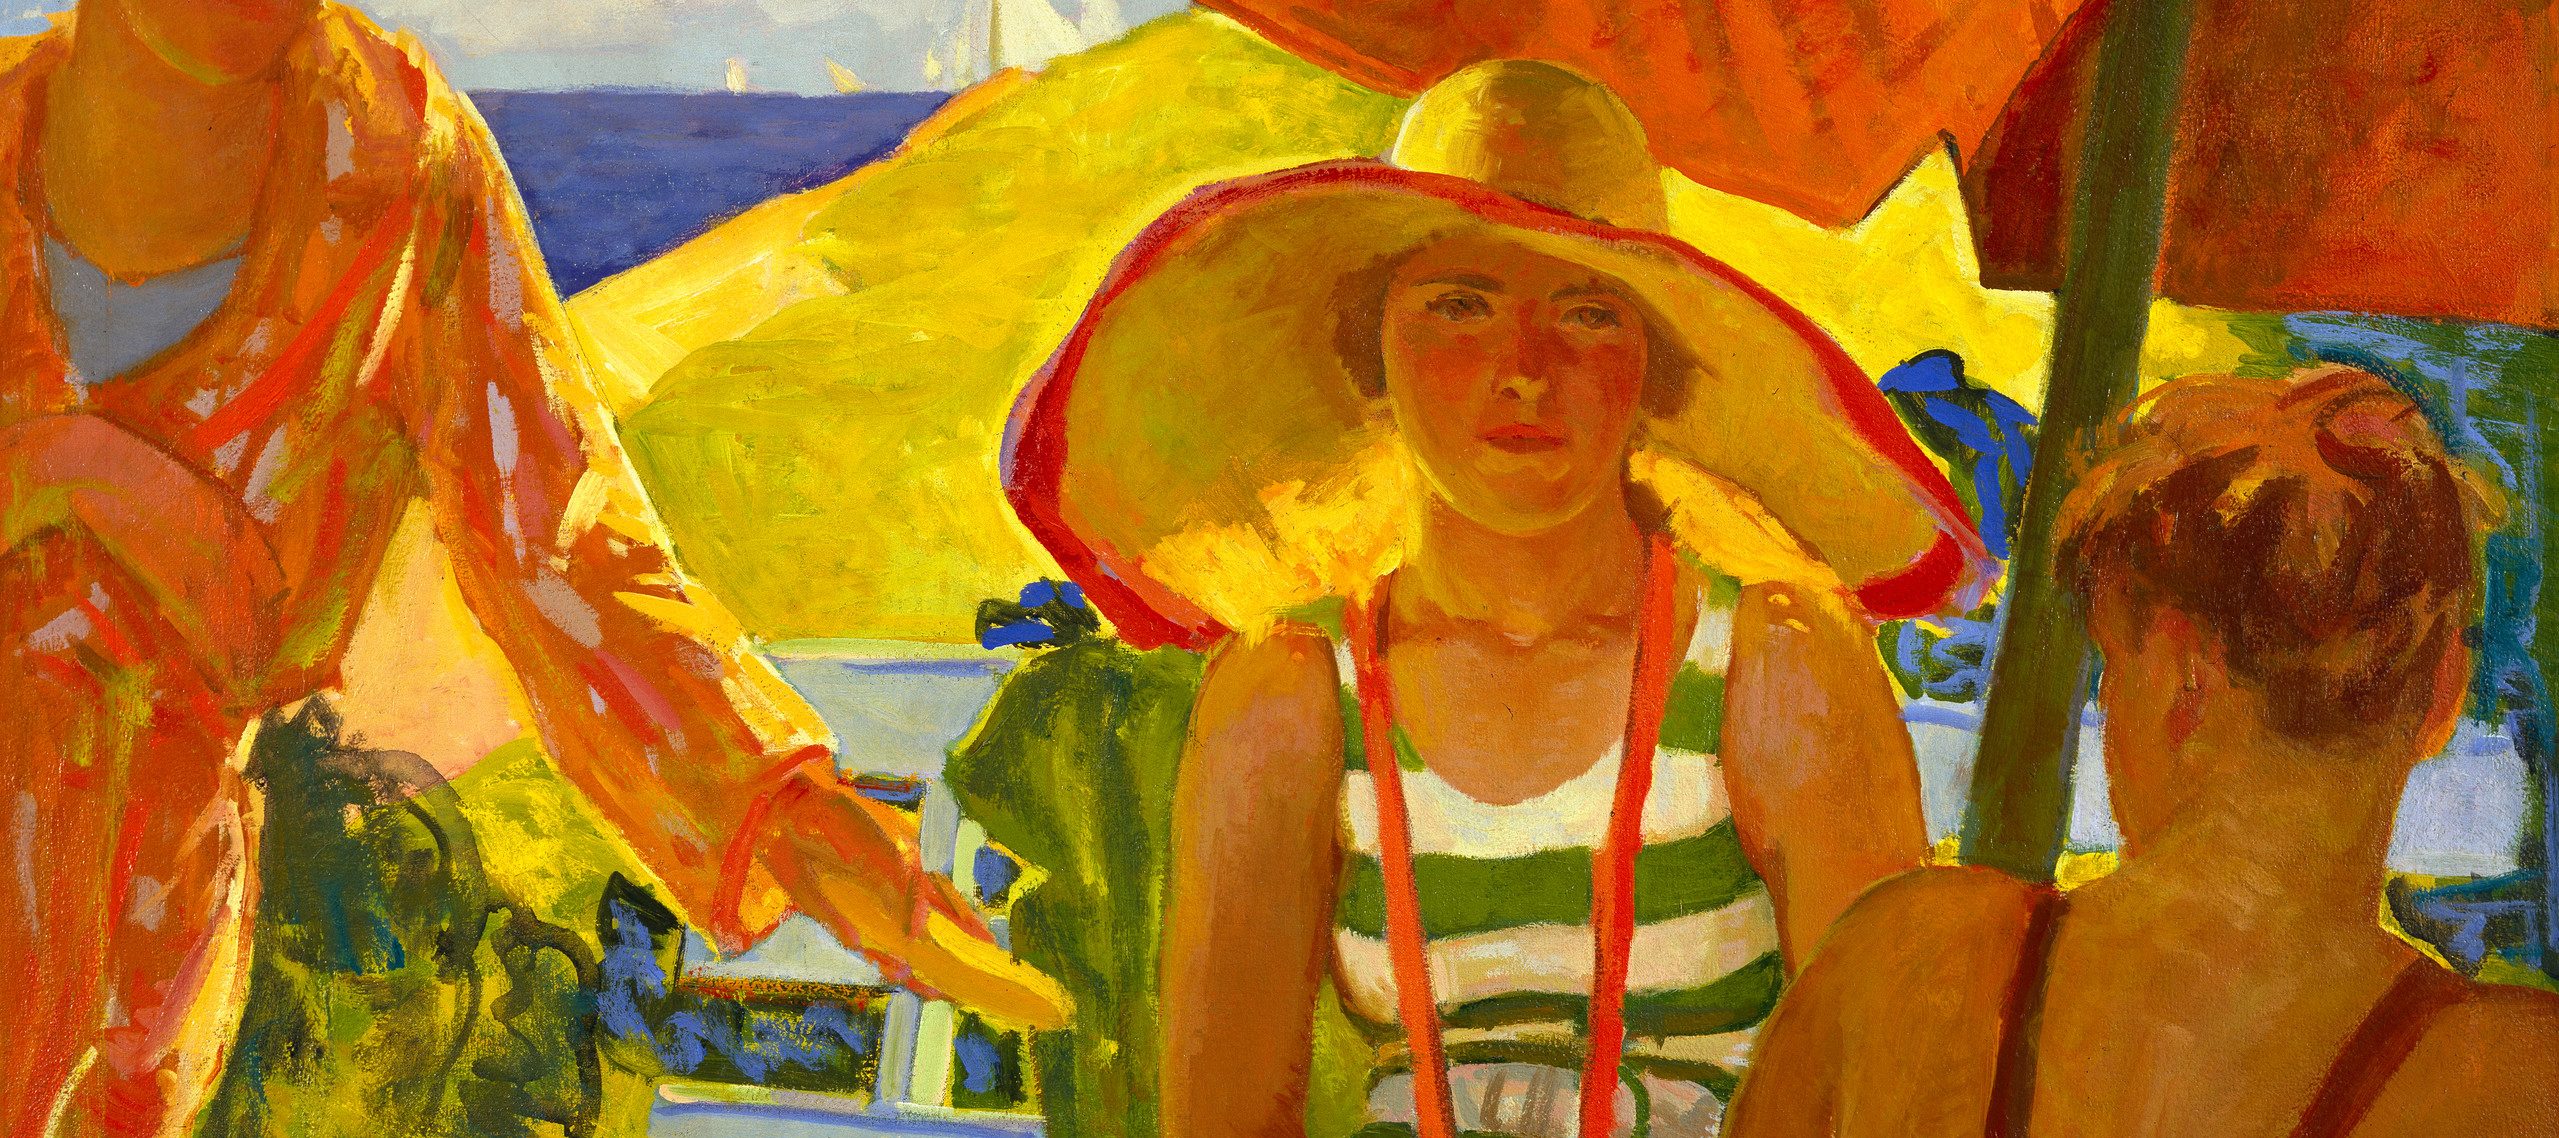 A painting of three light-skinned women sitting under an orange umbrella with a deep blue ocean and a few small sailboats in the background. The central figure sits on a white bench facing the viewer with her hands folded in her lap. She wears a green and white striped bathing suit with a white belt from the 1930s and a large brimmed yellow hat with a bright orange stripe around the edge of the brim.